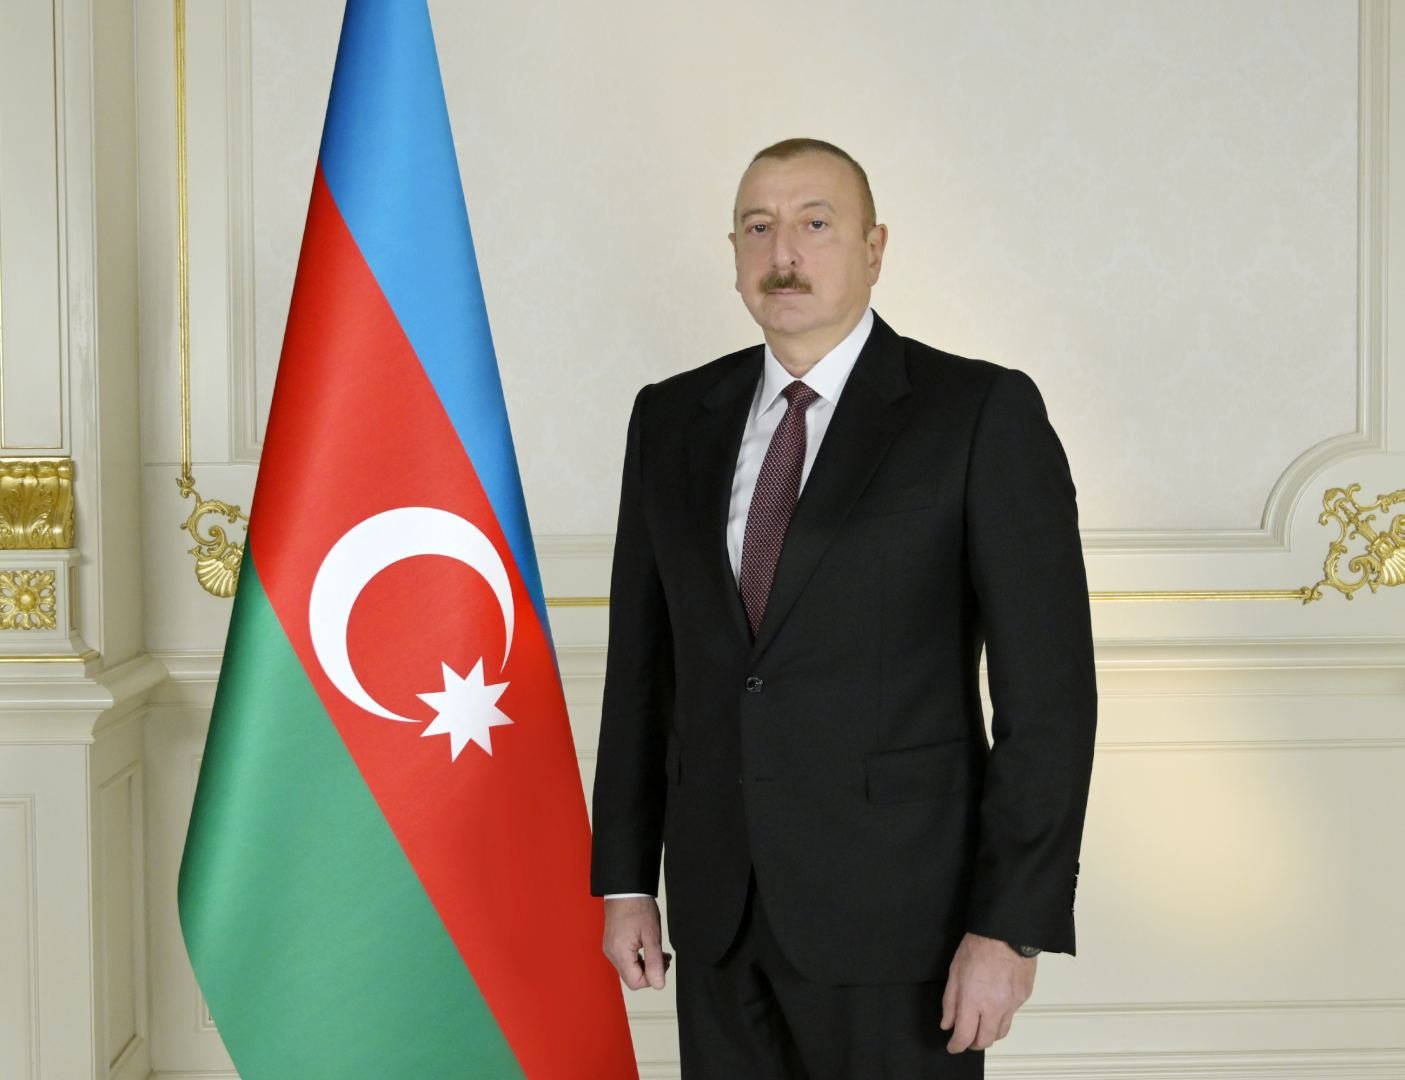 Today there are broad opportunities to deepen further ties between Azerbaijan and Japan - President Ilham Aliyev